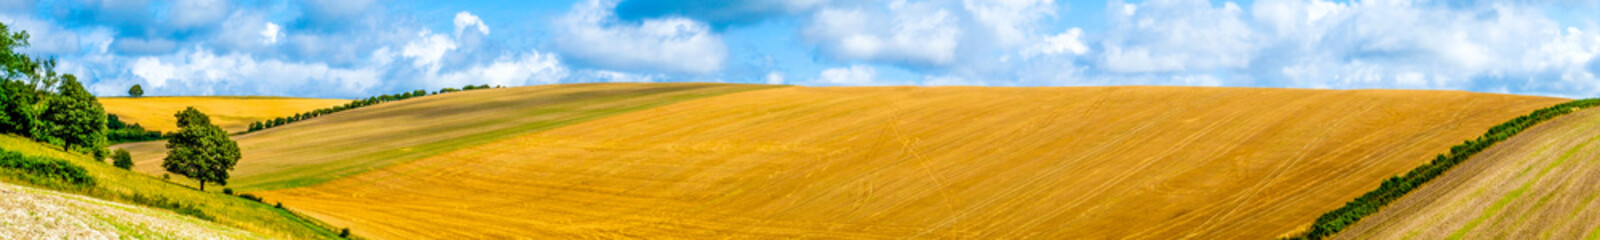 Sussex, English countryside, rolling hills with golden crops growing